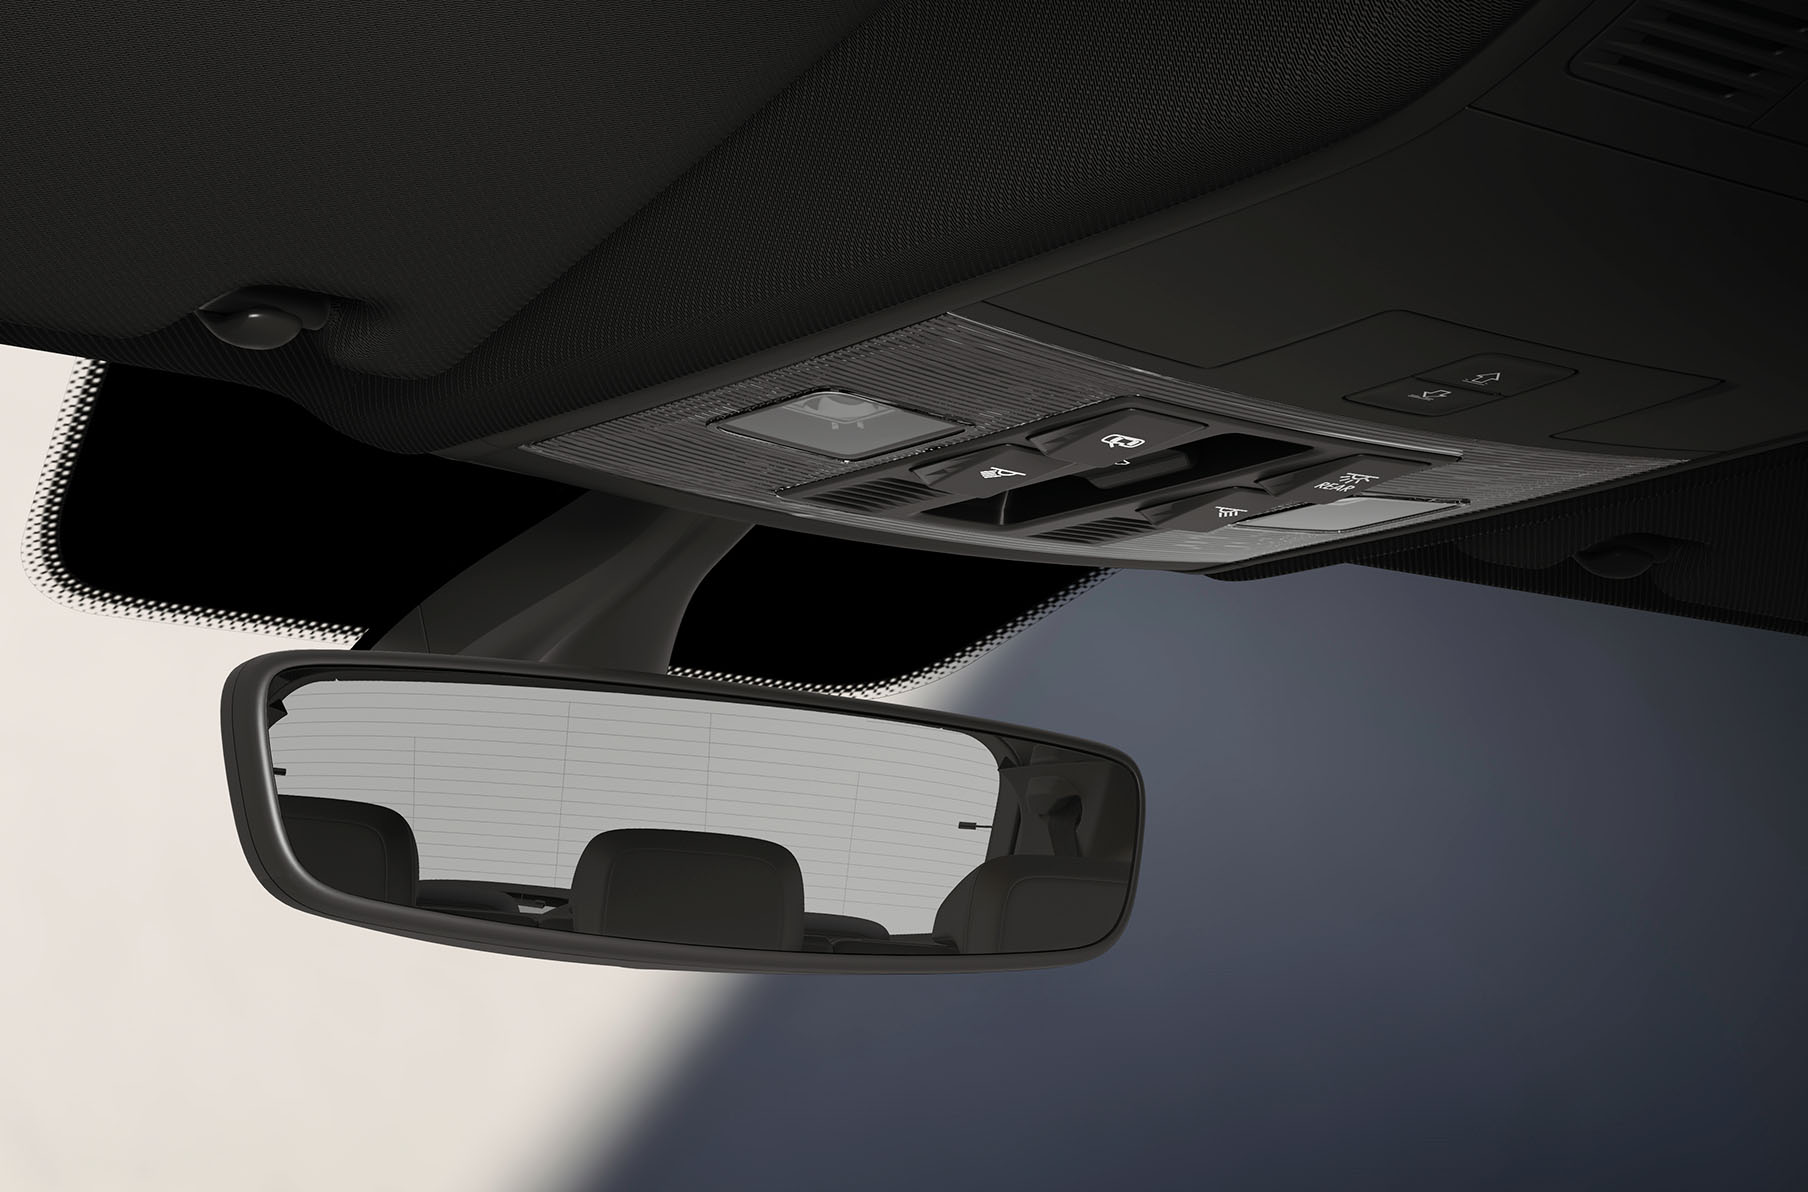 The SEAT Tarraco XPERIENCE auto-dimming rear view mirror